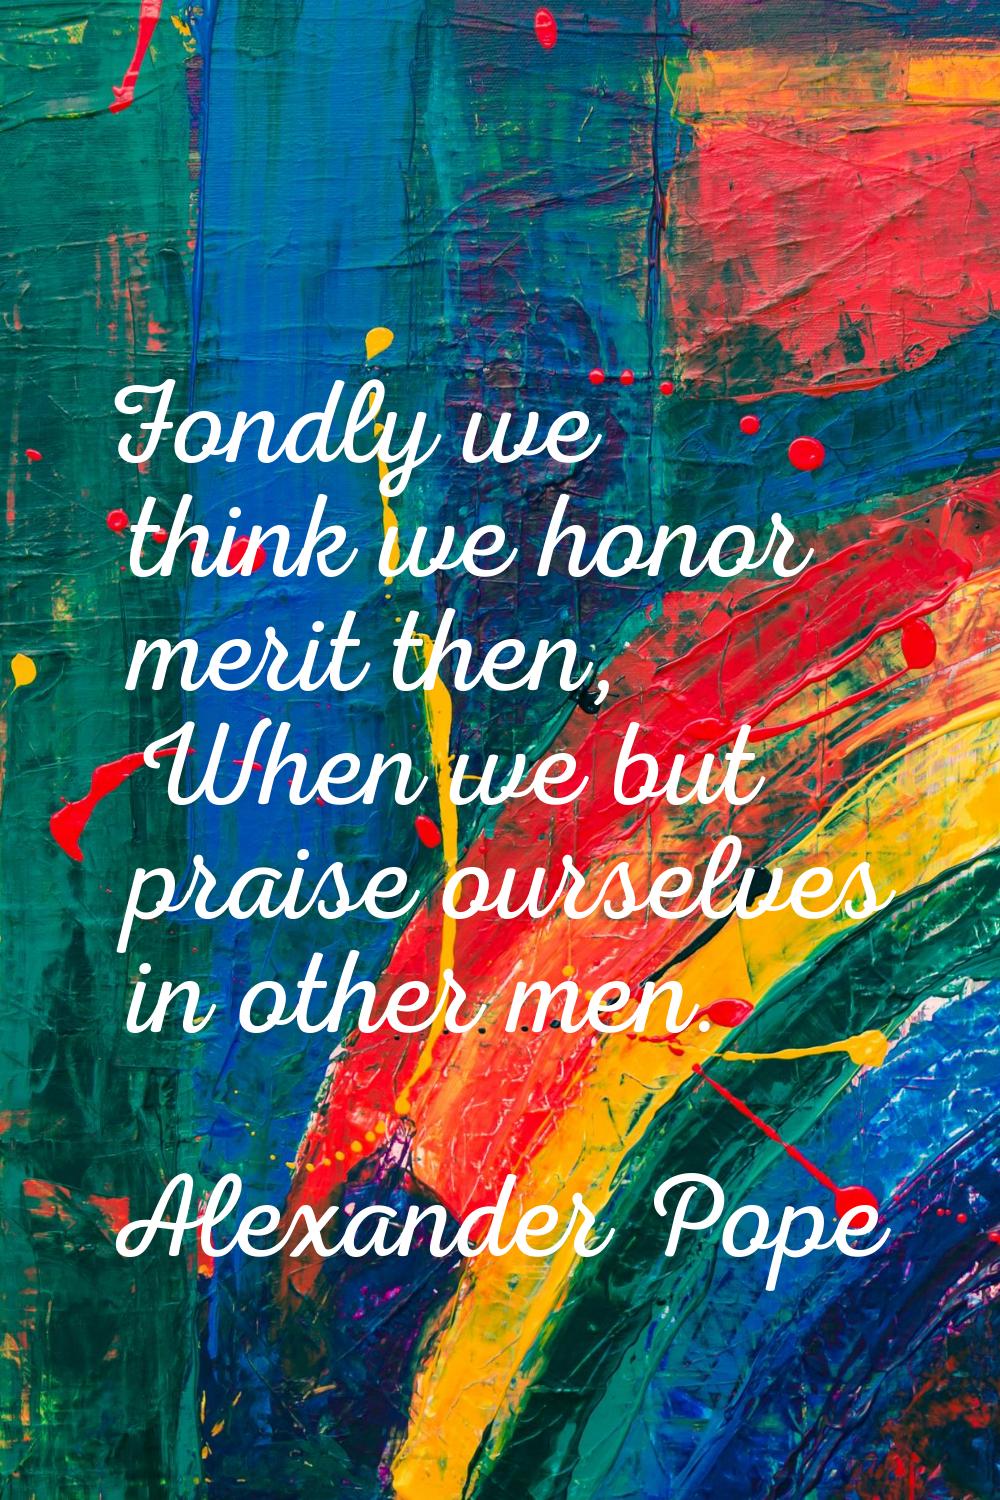 Fondly we think we honor merit then, When we but praise ourselves in other men.